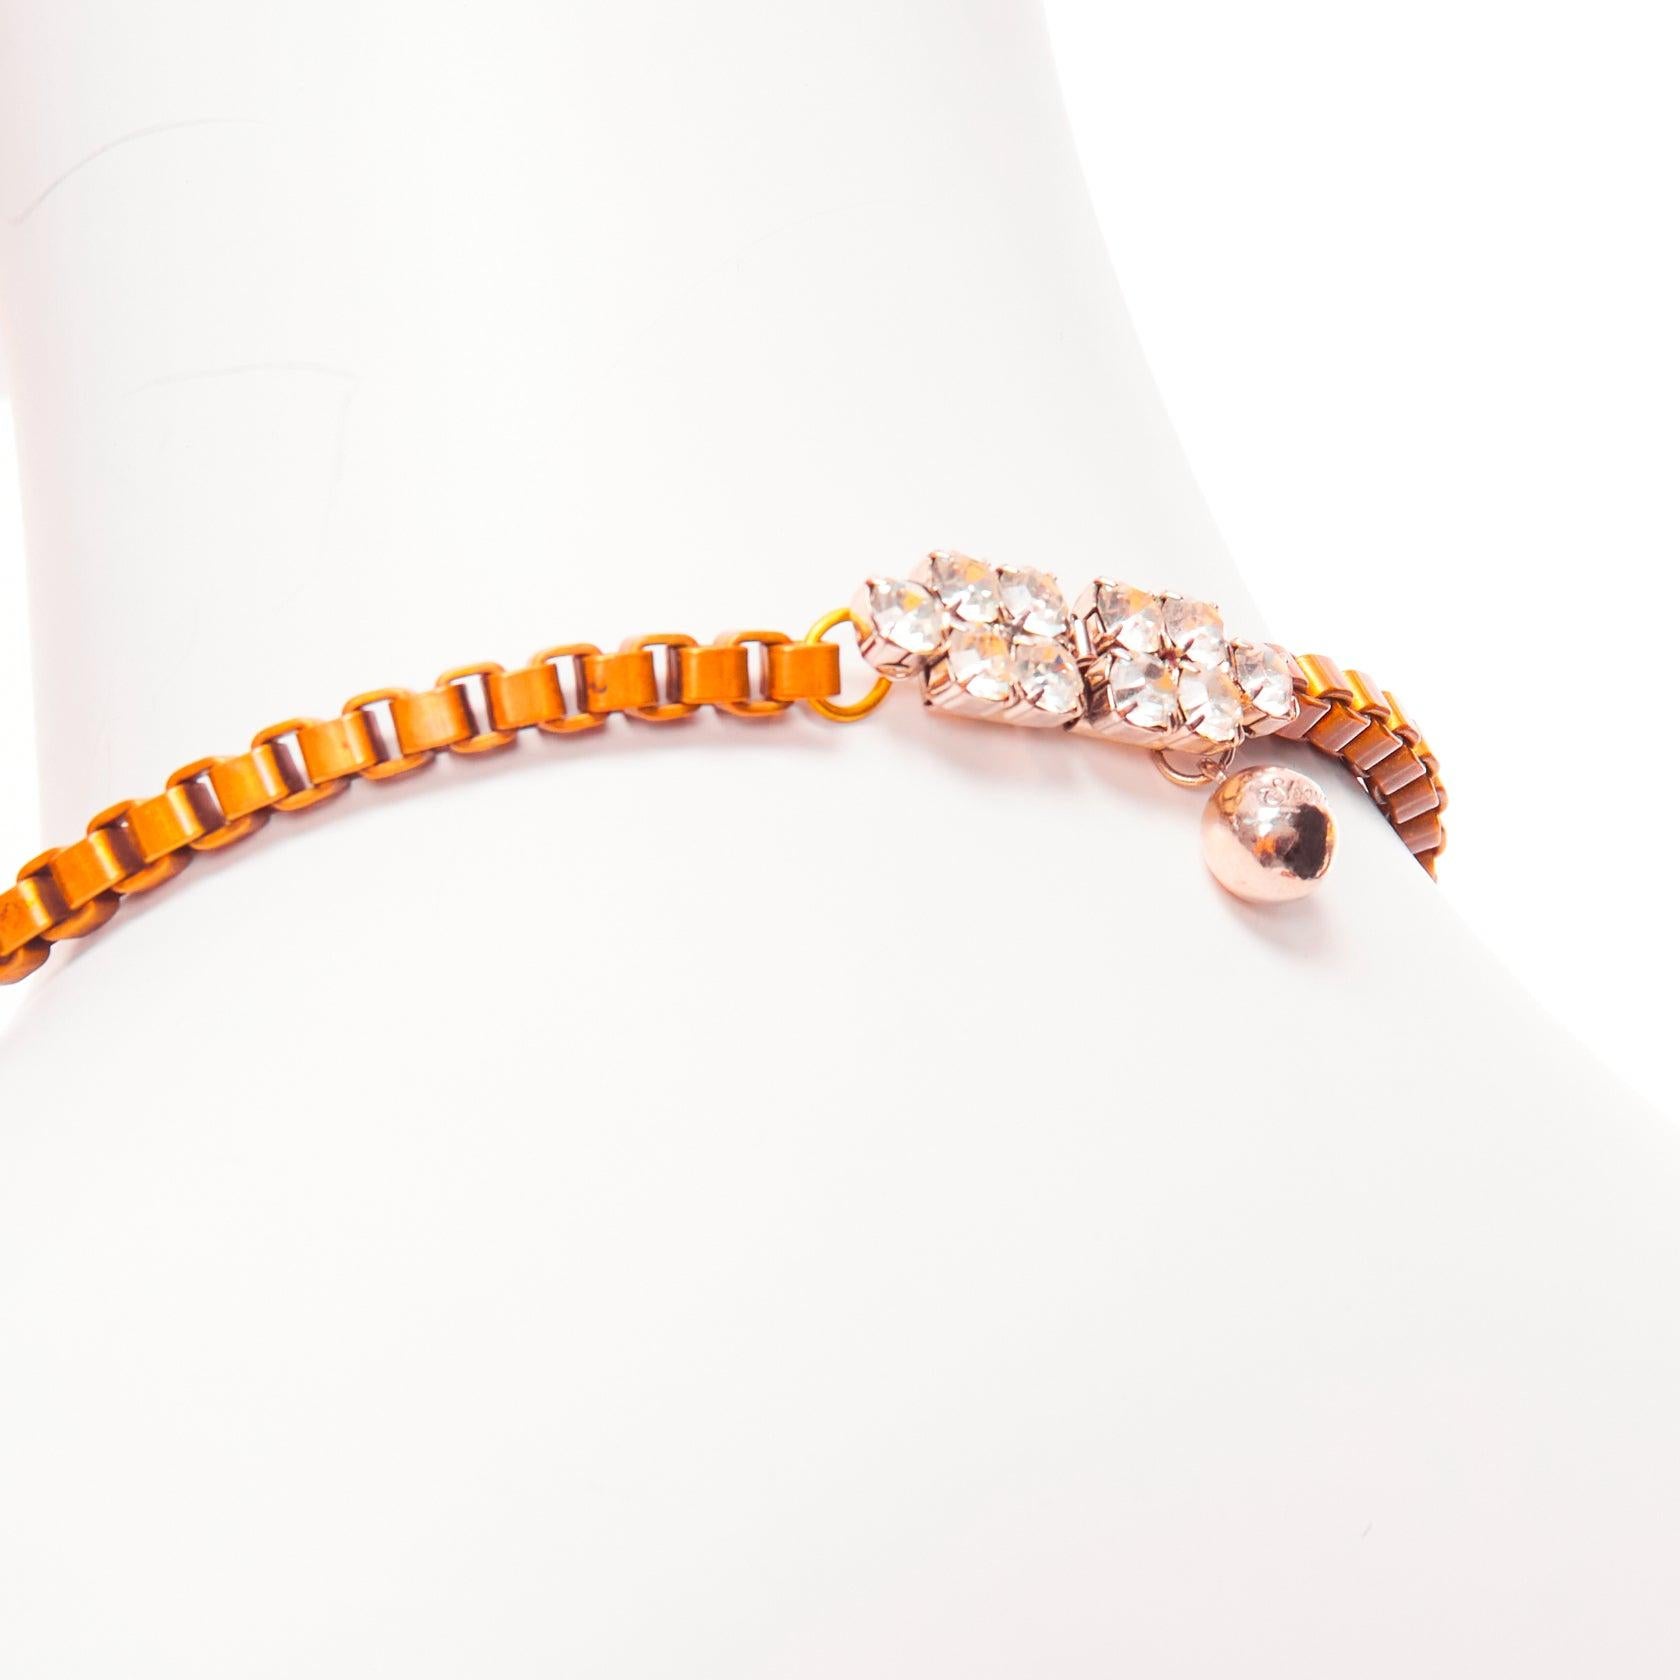 SHOUROUK neon orange multicolor beads pvc jewel short necklace
Reference: AAWC/A01042
Brand: Shourouk
Material: PVC
Color: Multicolour
Pattern: Solid
Closure: Push Clasp
Lining: Bronze Metal
Extra Details: Crystal push clasp at